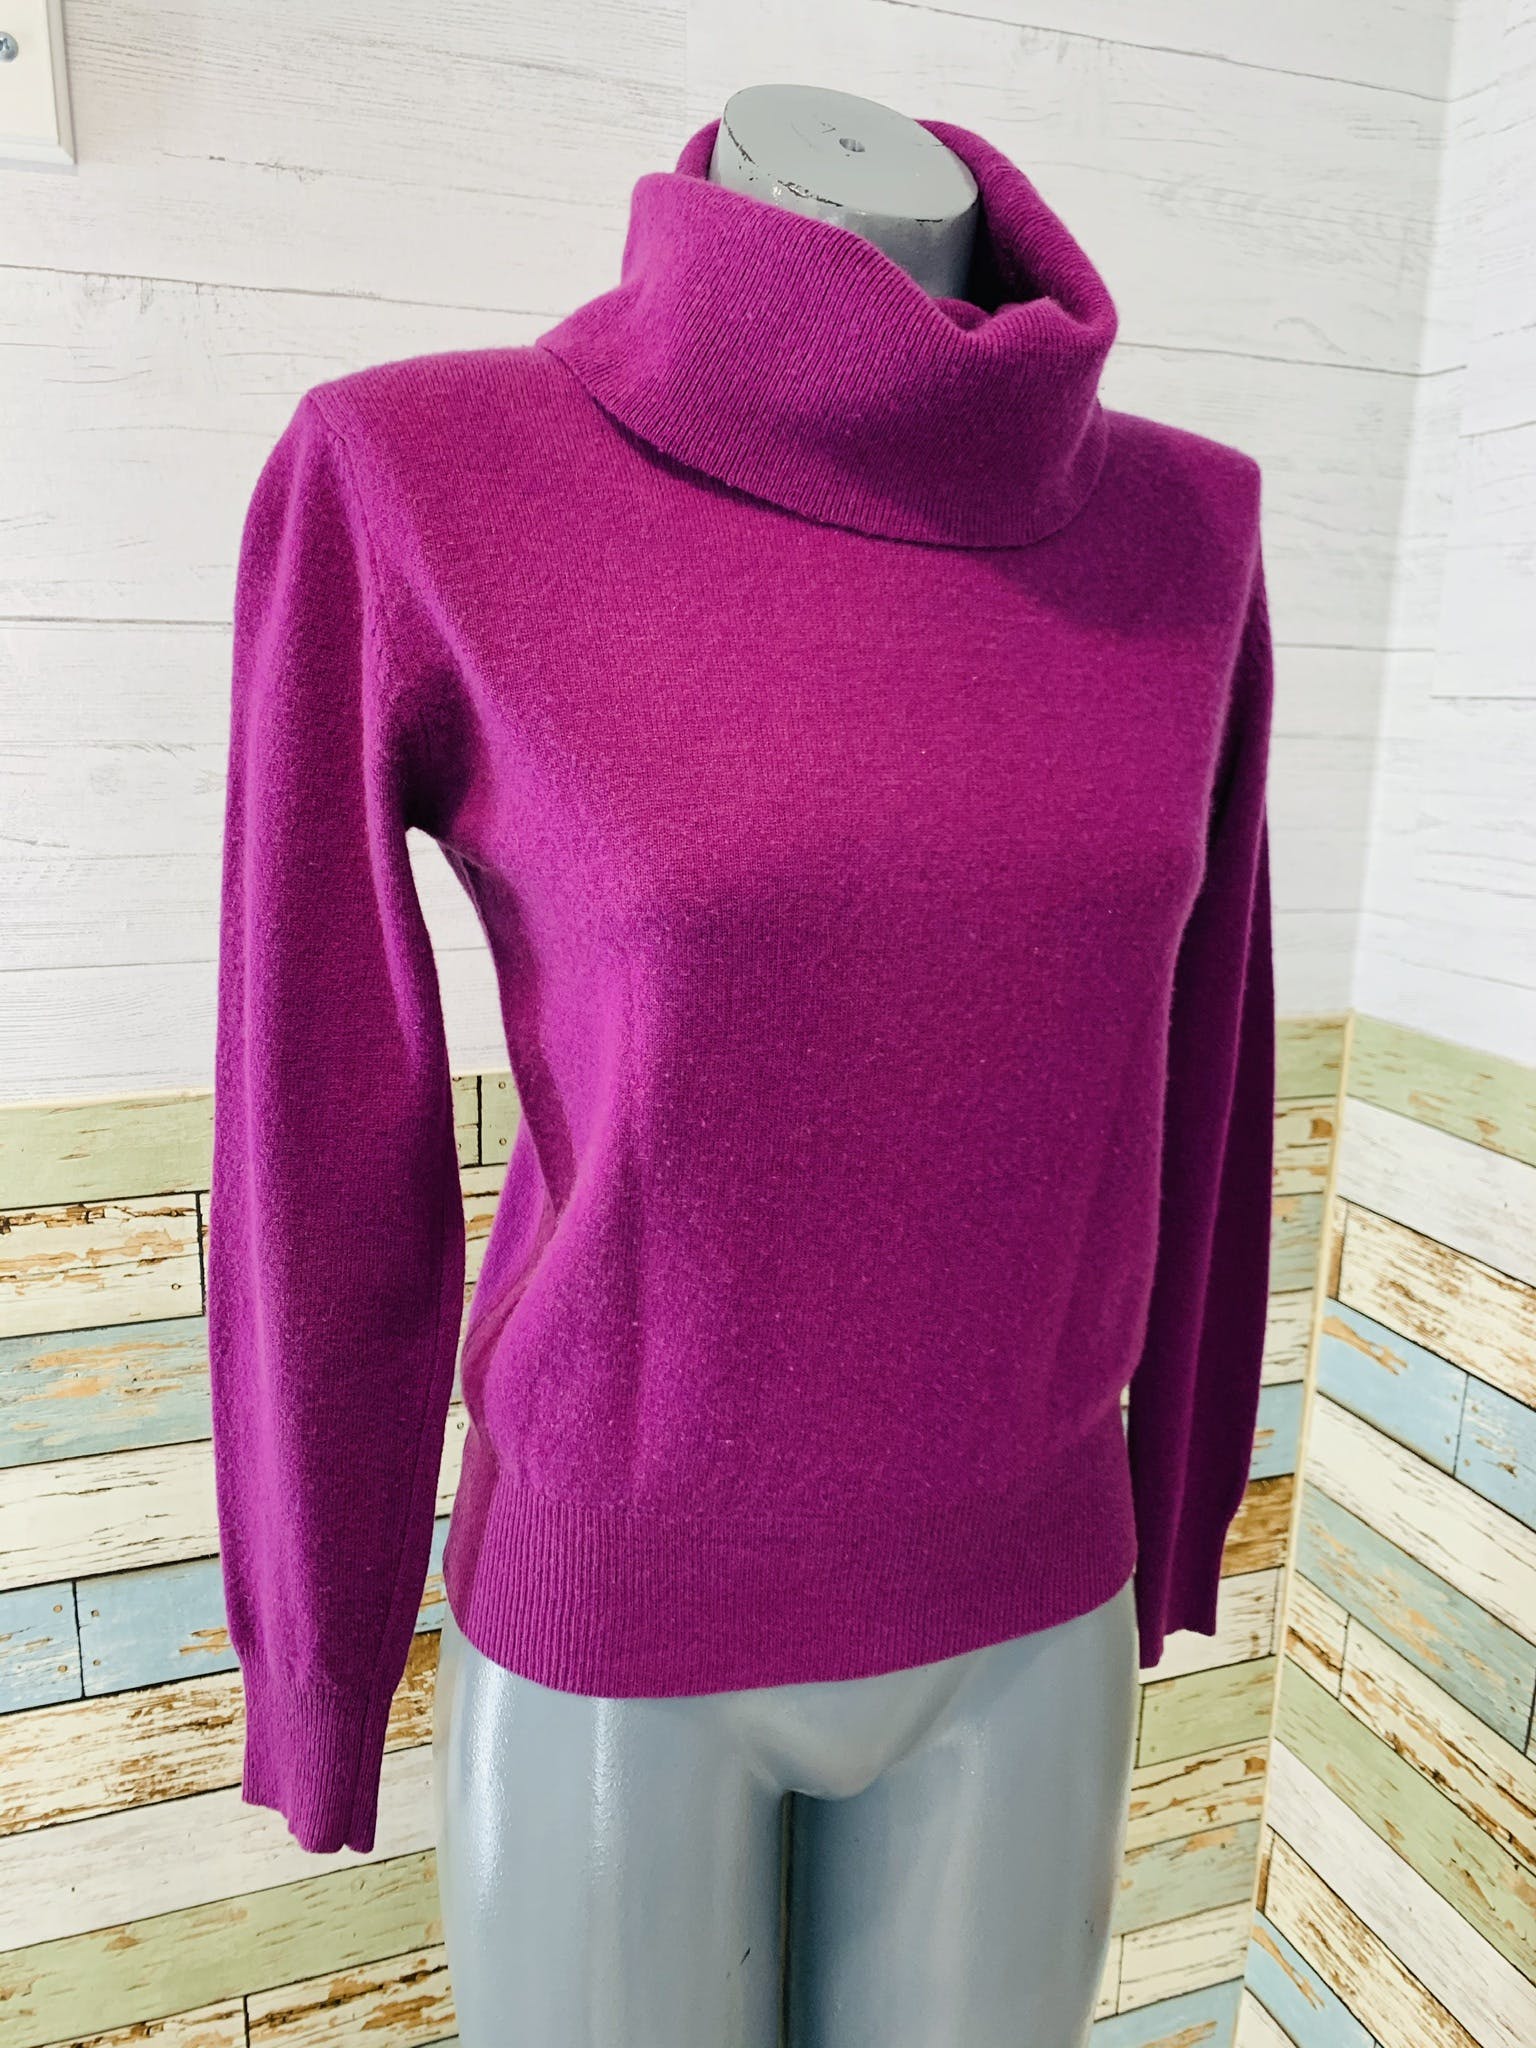 Vintage 80's Purple Cashmere Turtleneck Sweater by Feen Wright & Manson ...